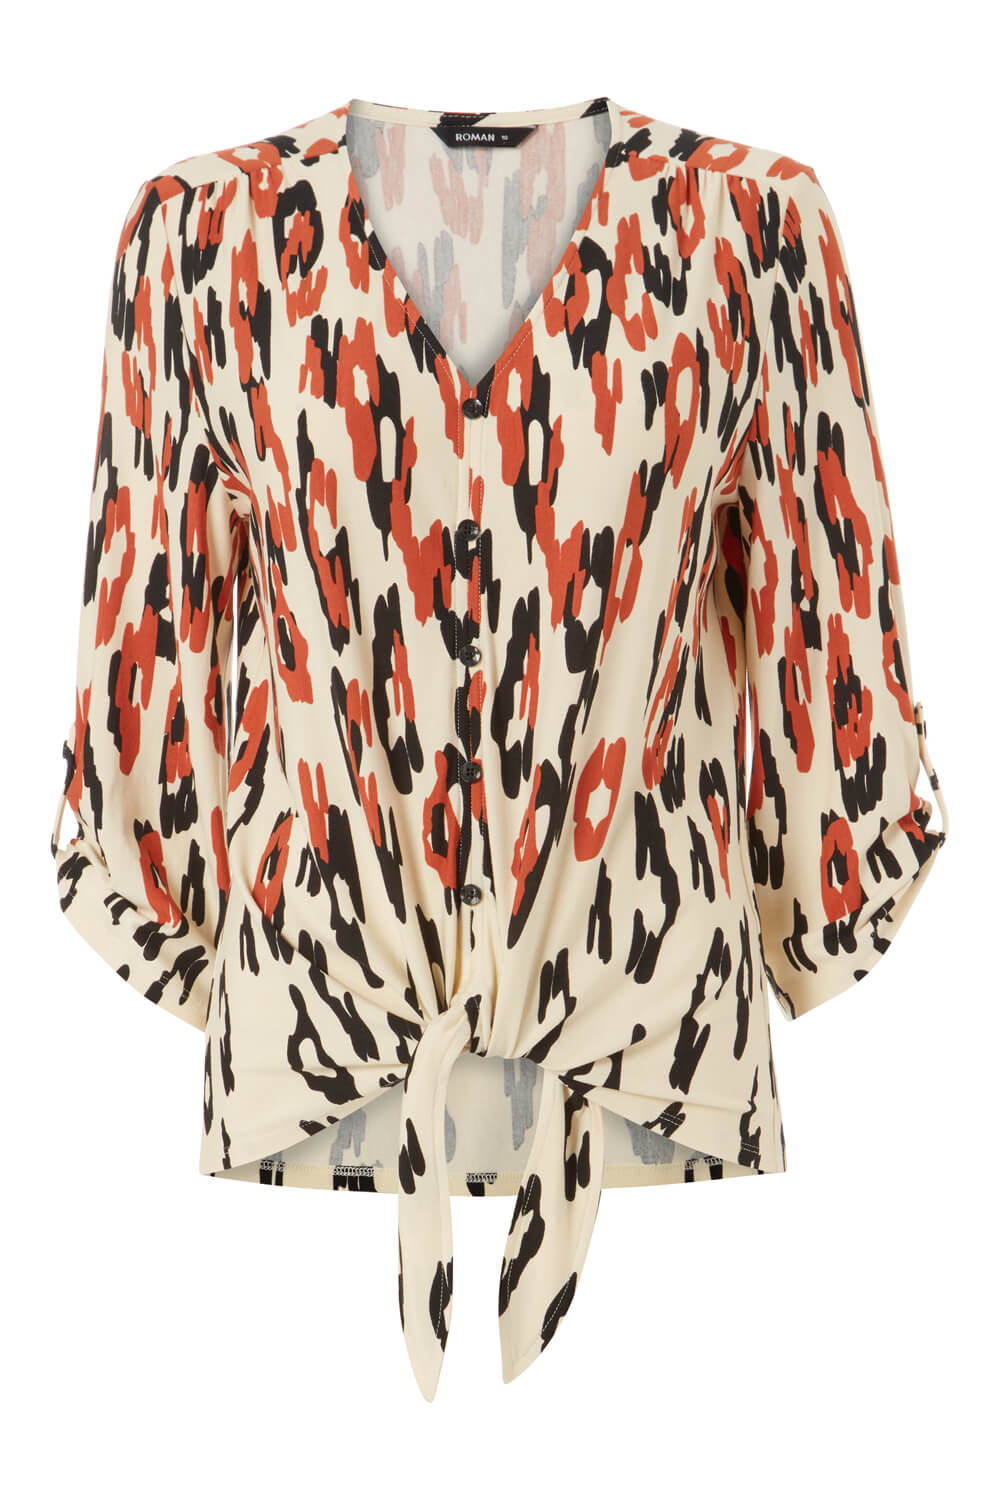 Neutral Tie Front Animal Print Top, Image 5 of 5